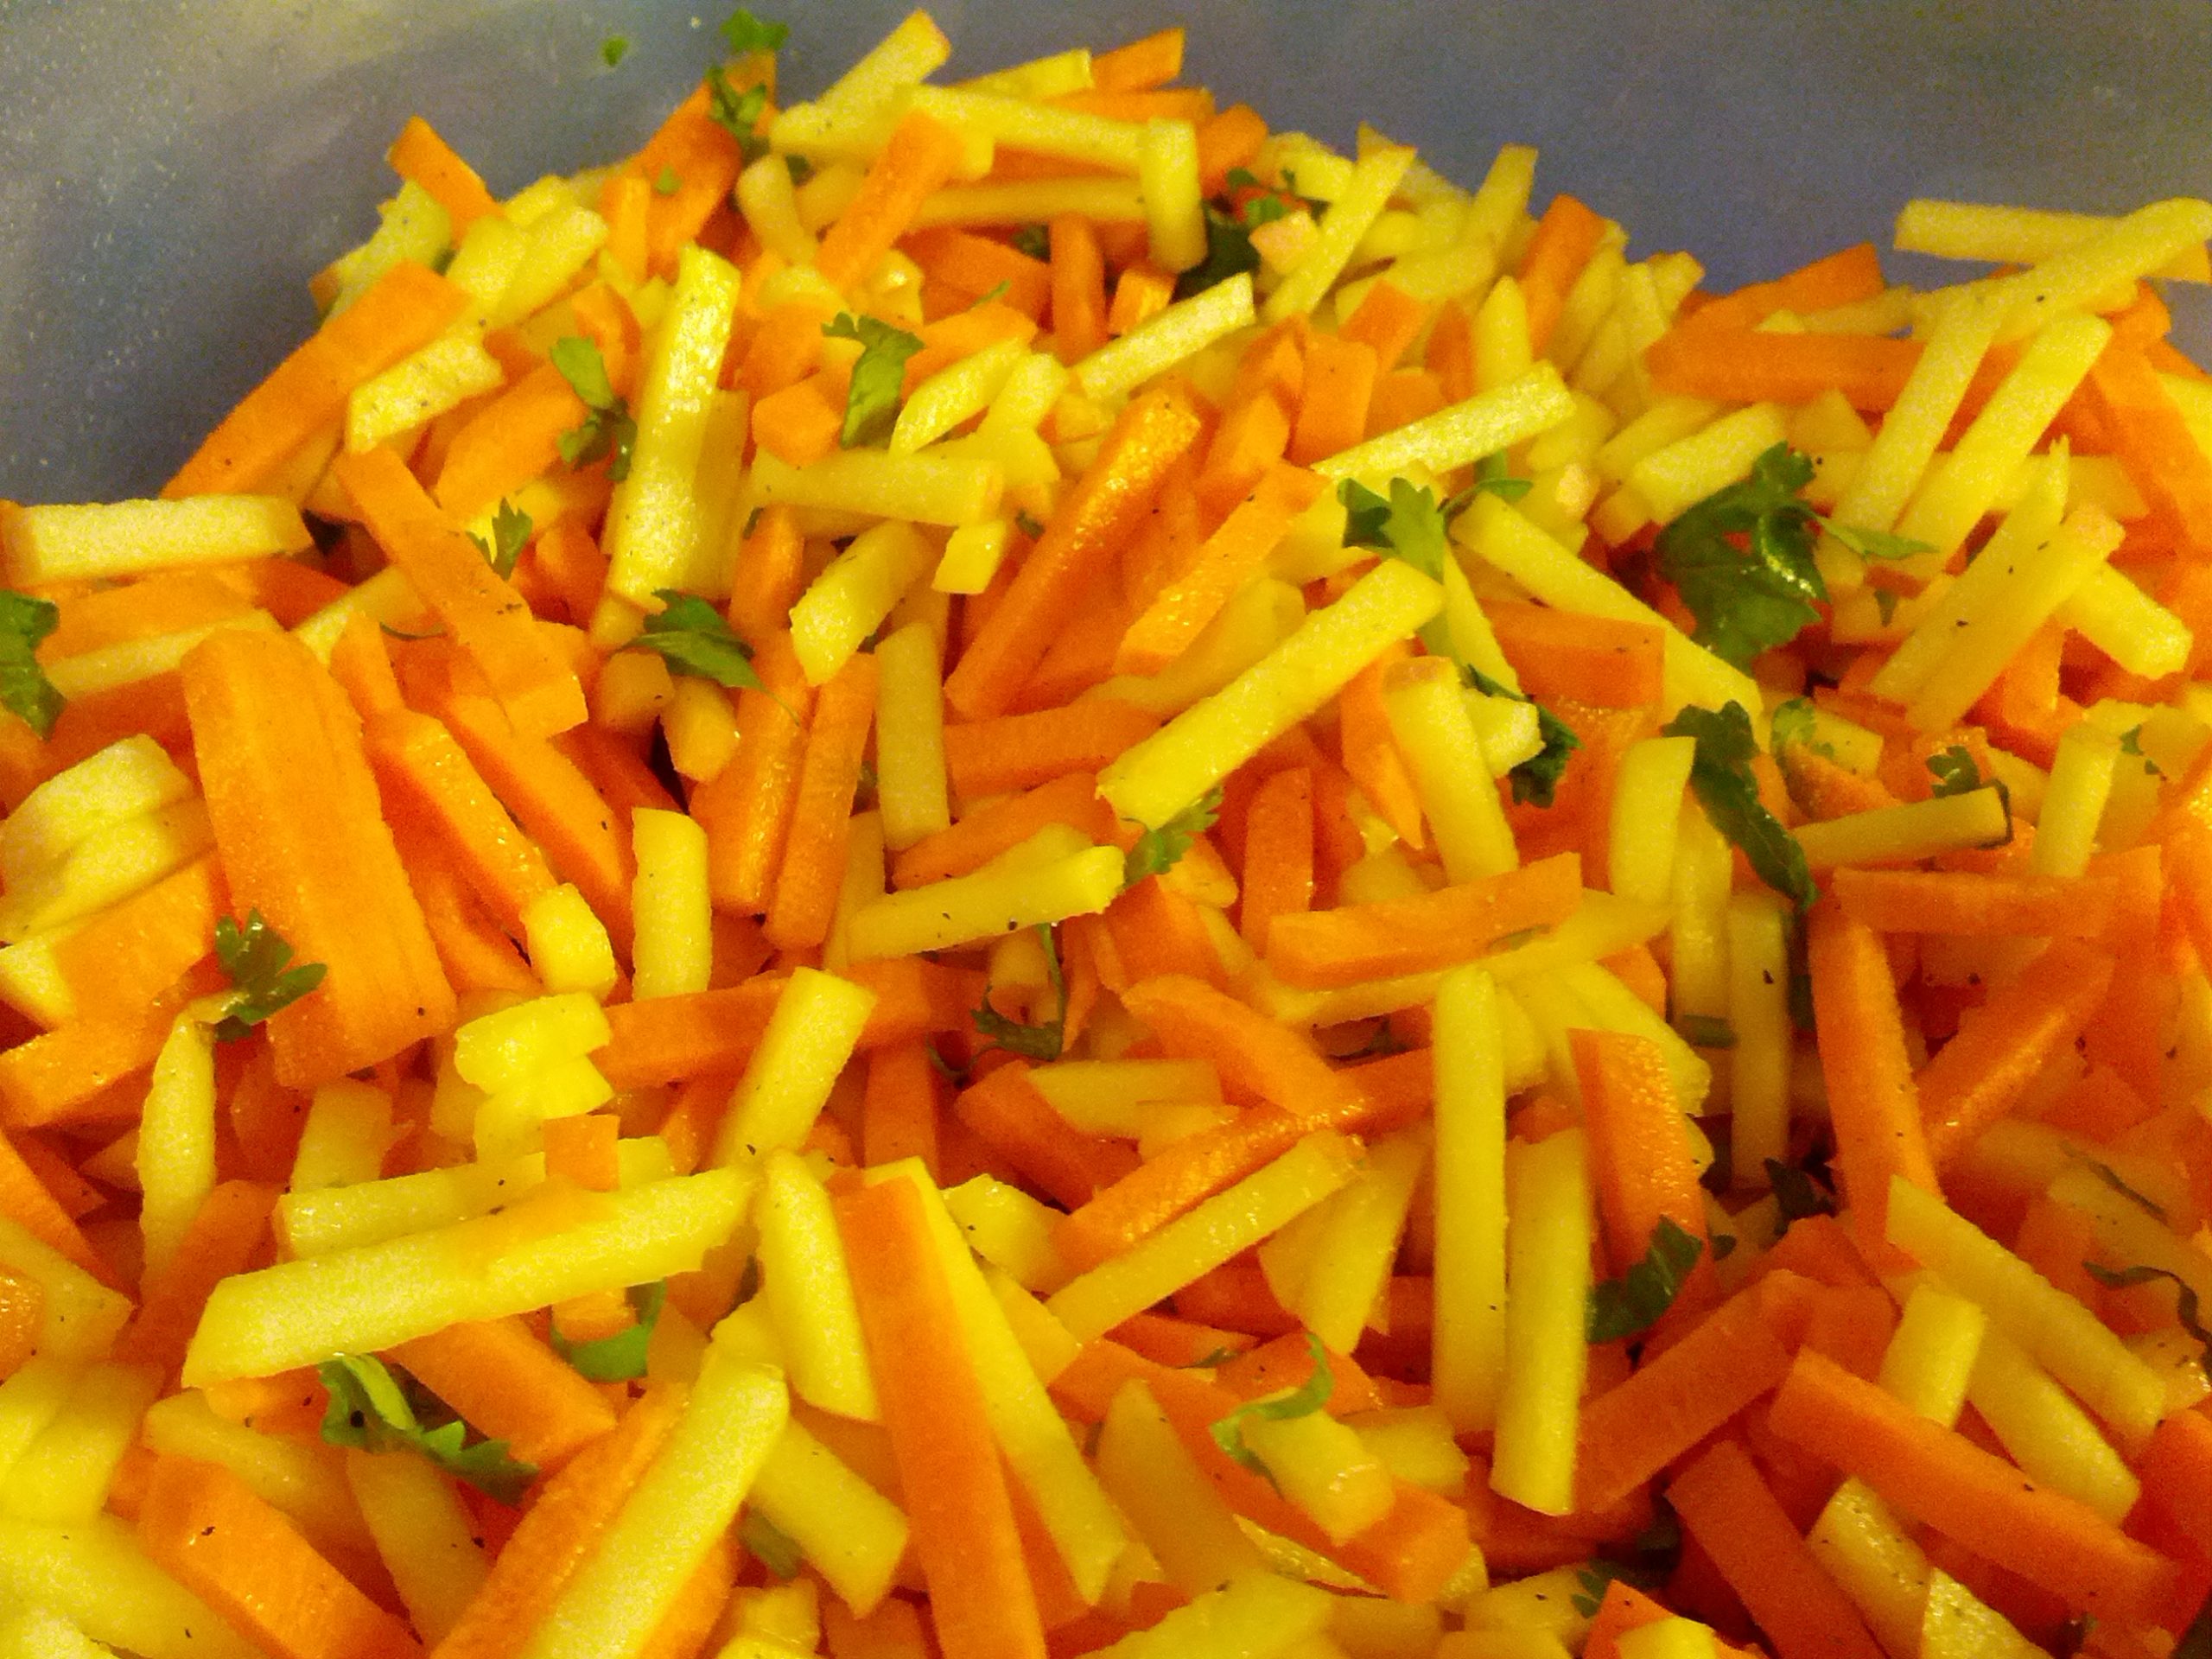 Apple, carrot, salad, health, recipe, cook, cooking, blog, blogger